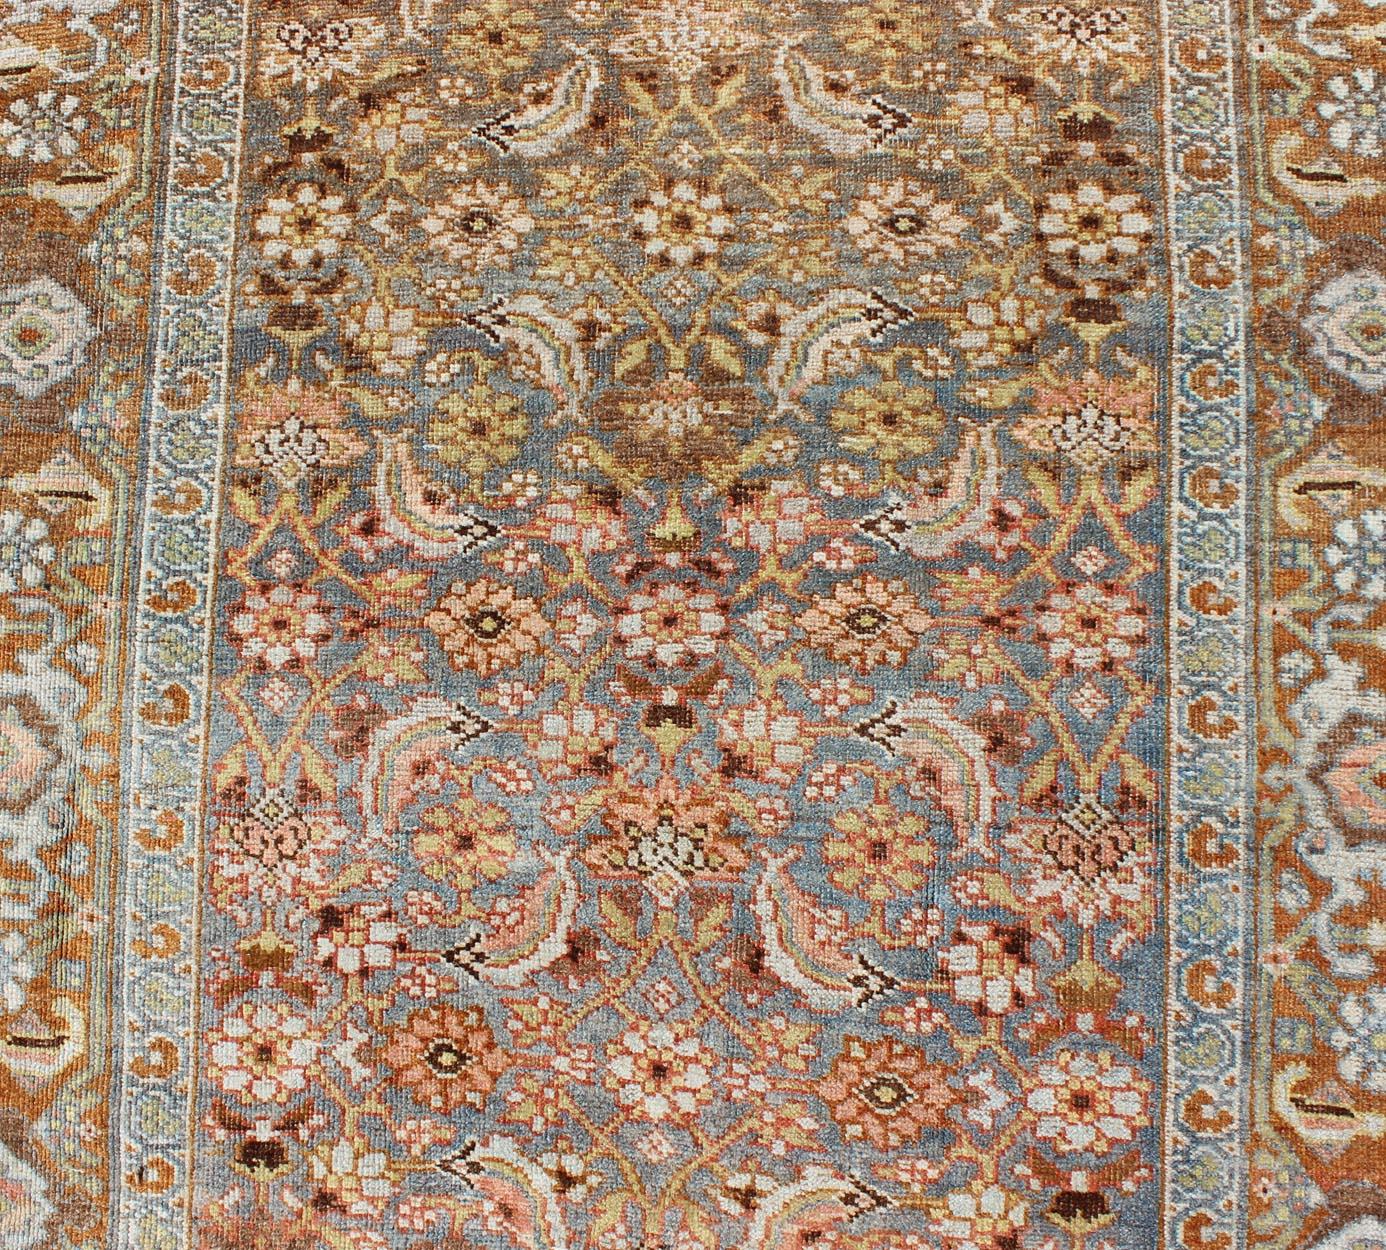 Ornate flower design Bidjar antique Persian rug in a variety of colors, Keivan Woven Arts/rug EMA-7545, country of origin / type: Iran / Bidjar, circa 1900

This magnificent Bidjar with an exquisite, all-over pattern, rests beautifully on a light